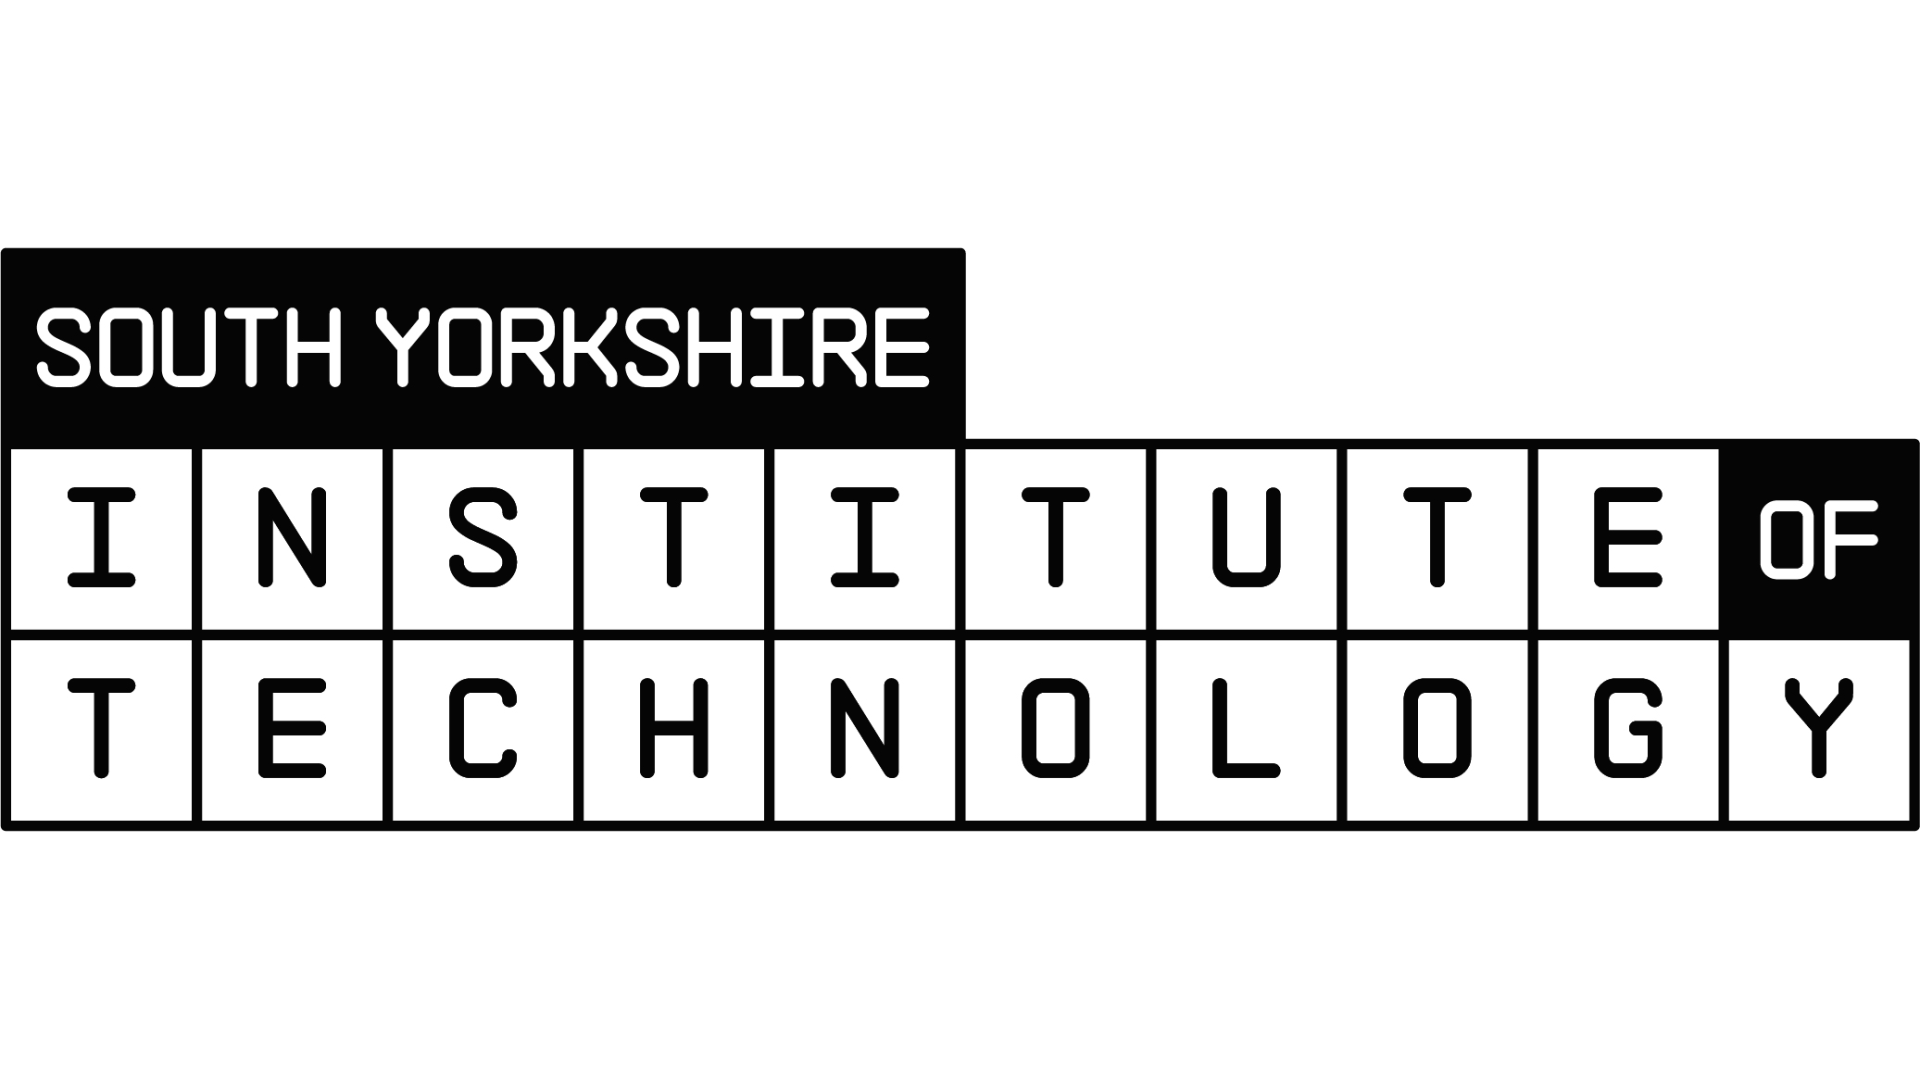 South Yorkshire Institute of Technology